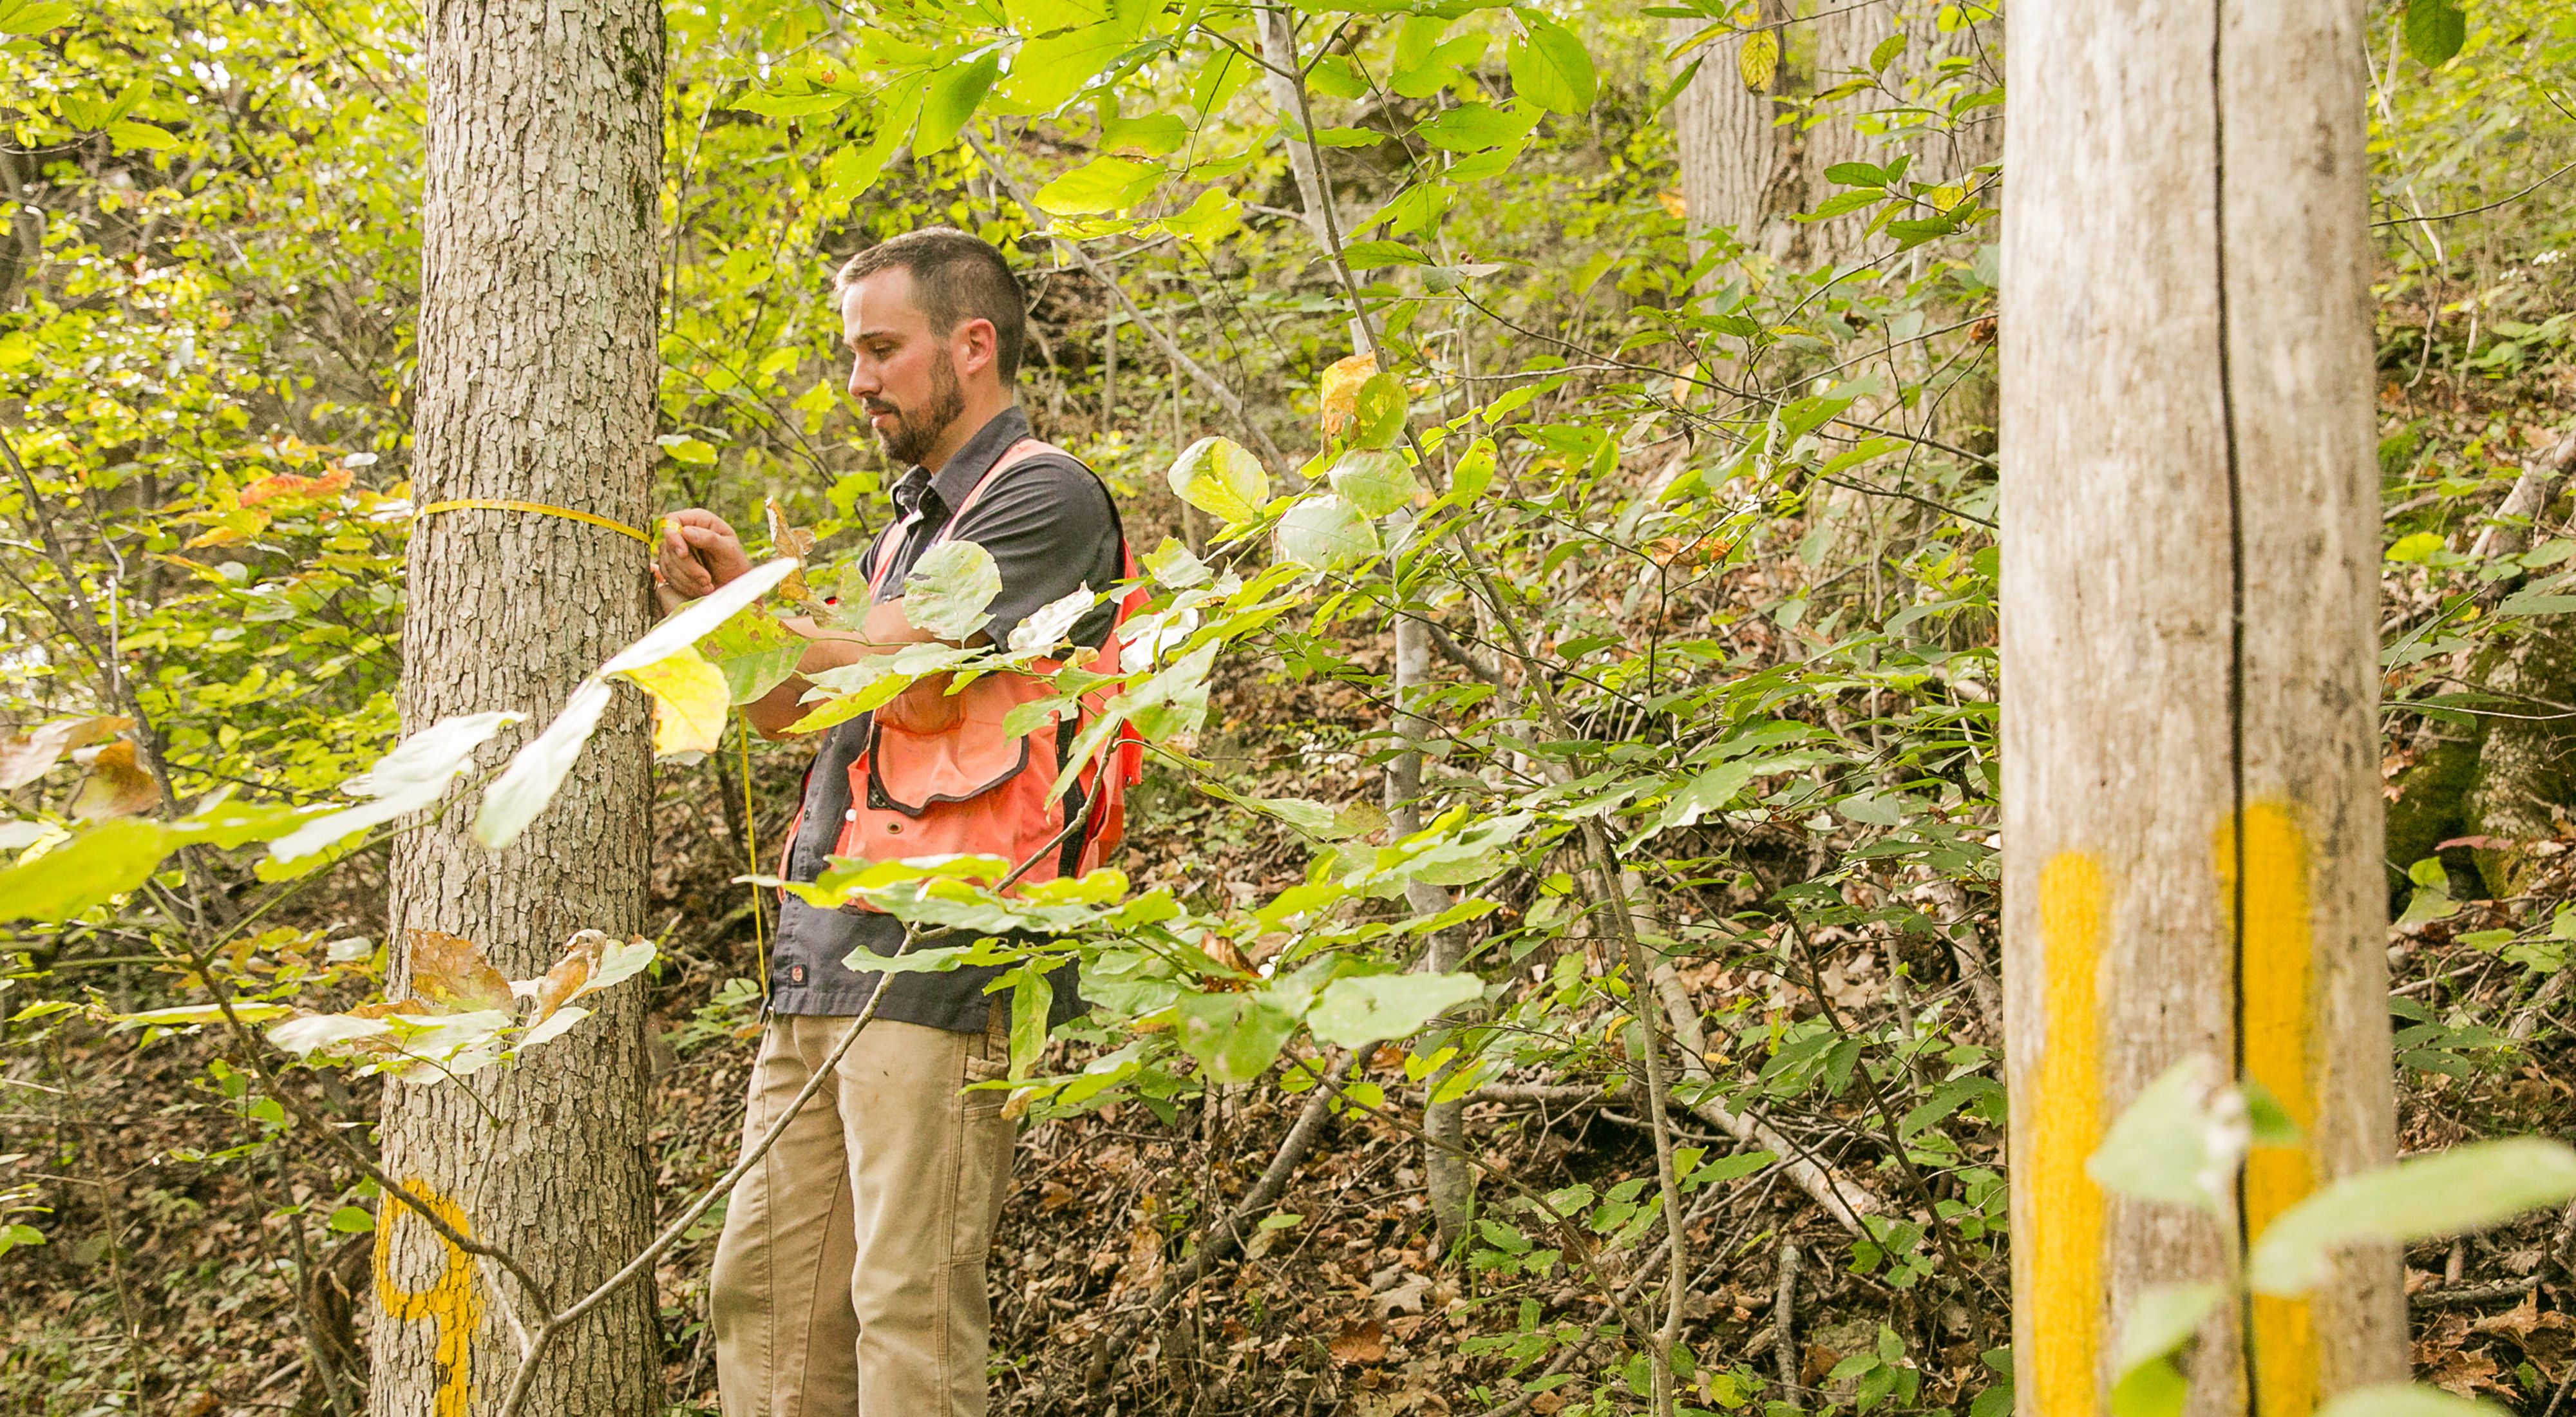 Appalachia Forest Manager, Mike Hall, measures and marks trees for thinning at Edge of Appalachia Preserve.